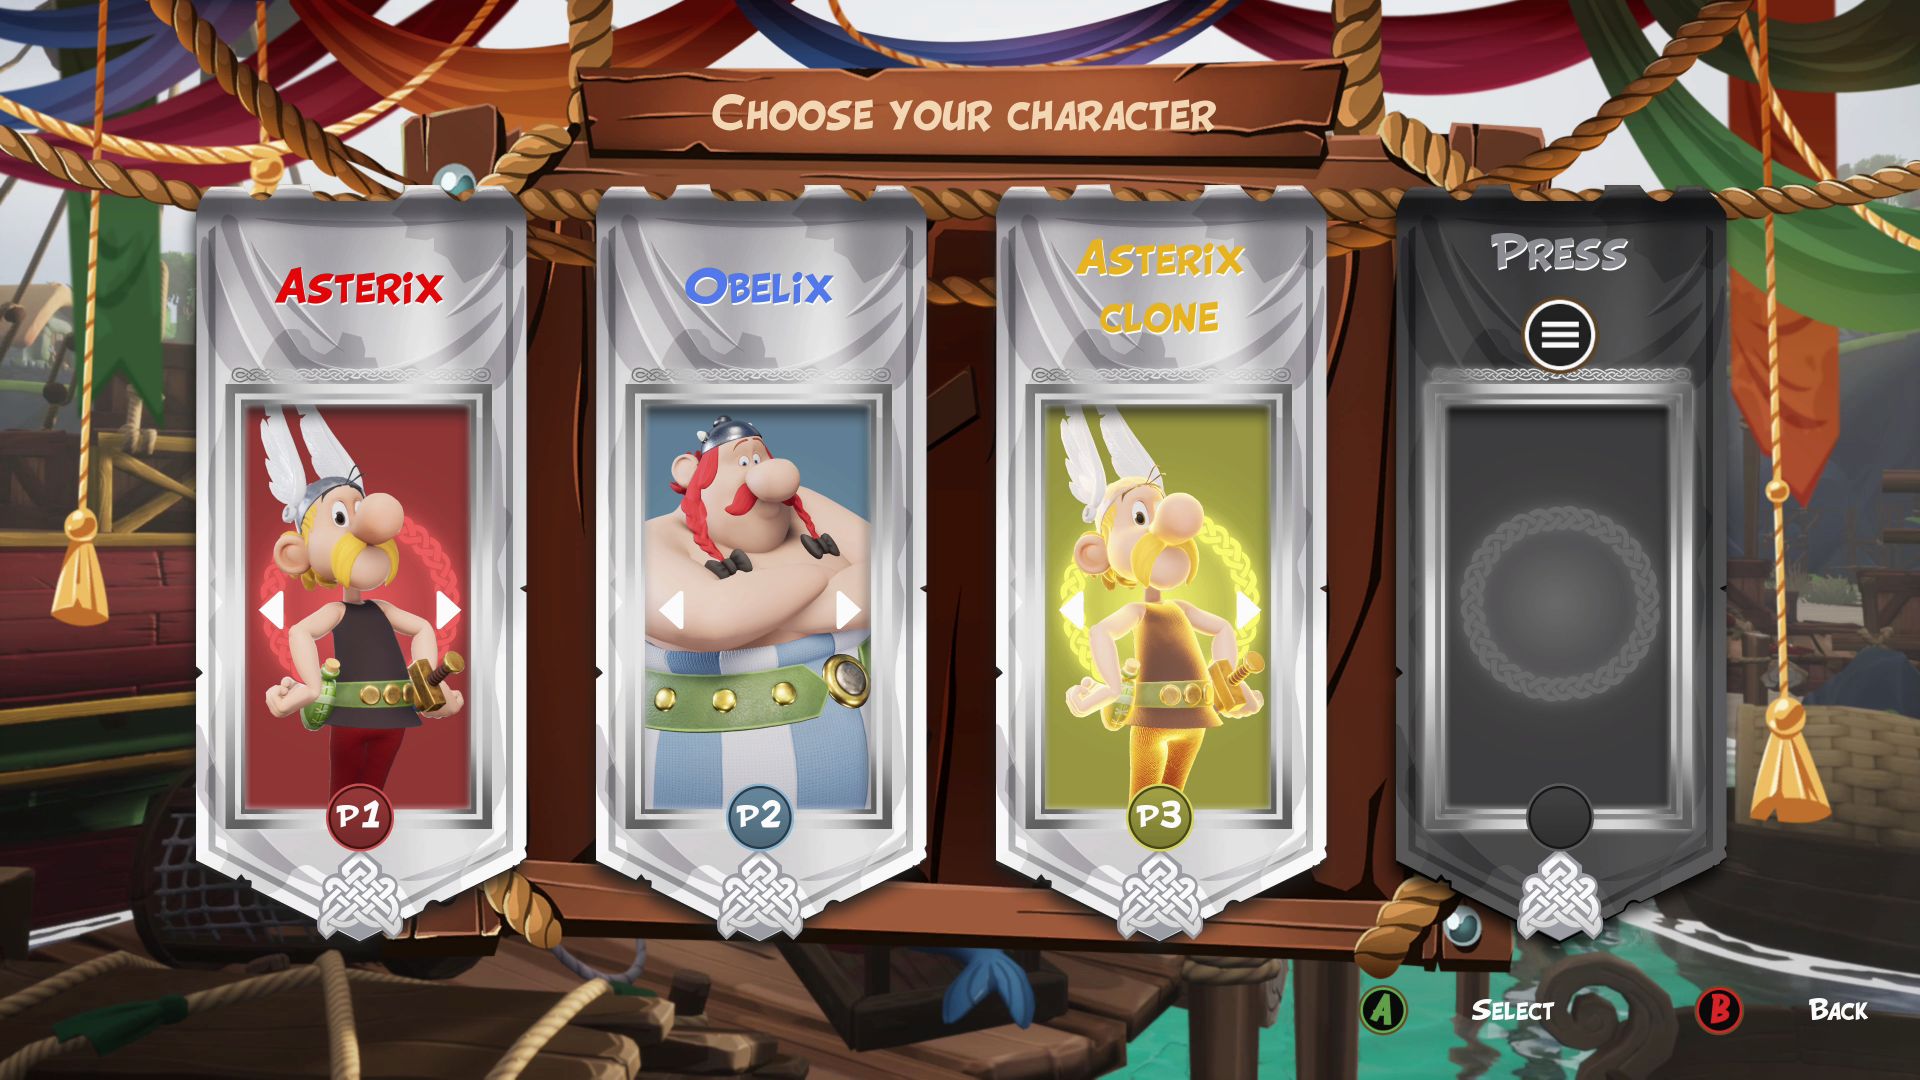 Asterix and Obelix XXXL The Ram from Hibernia Xbox Series X Character Select